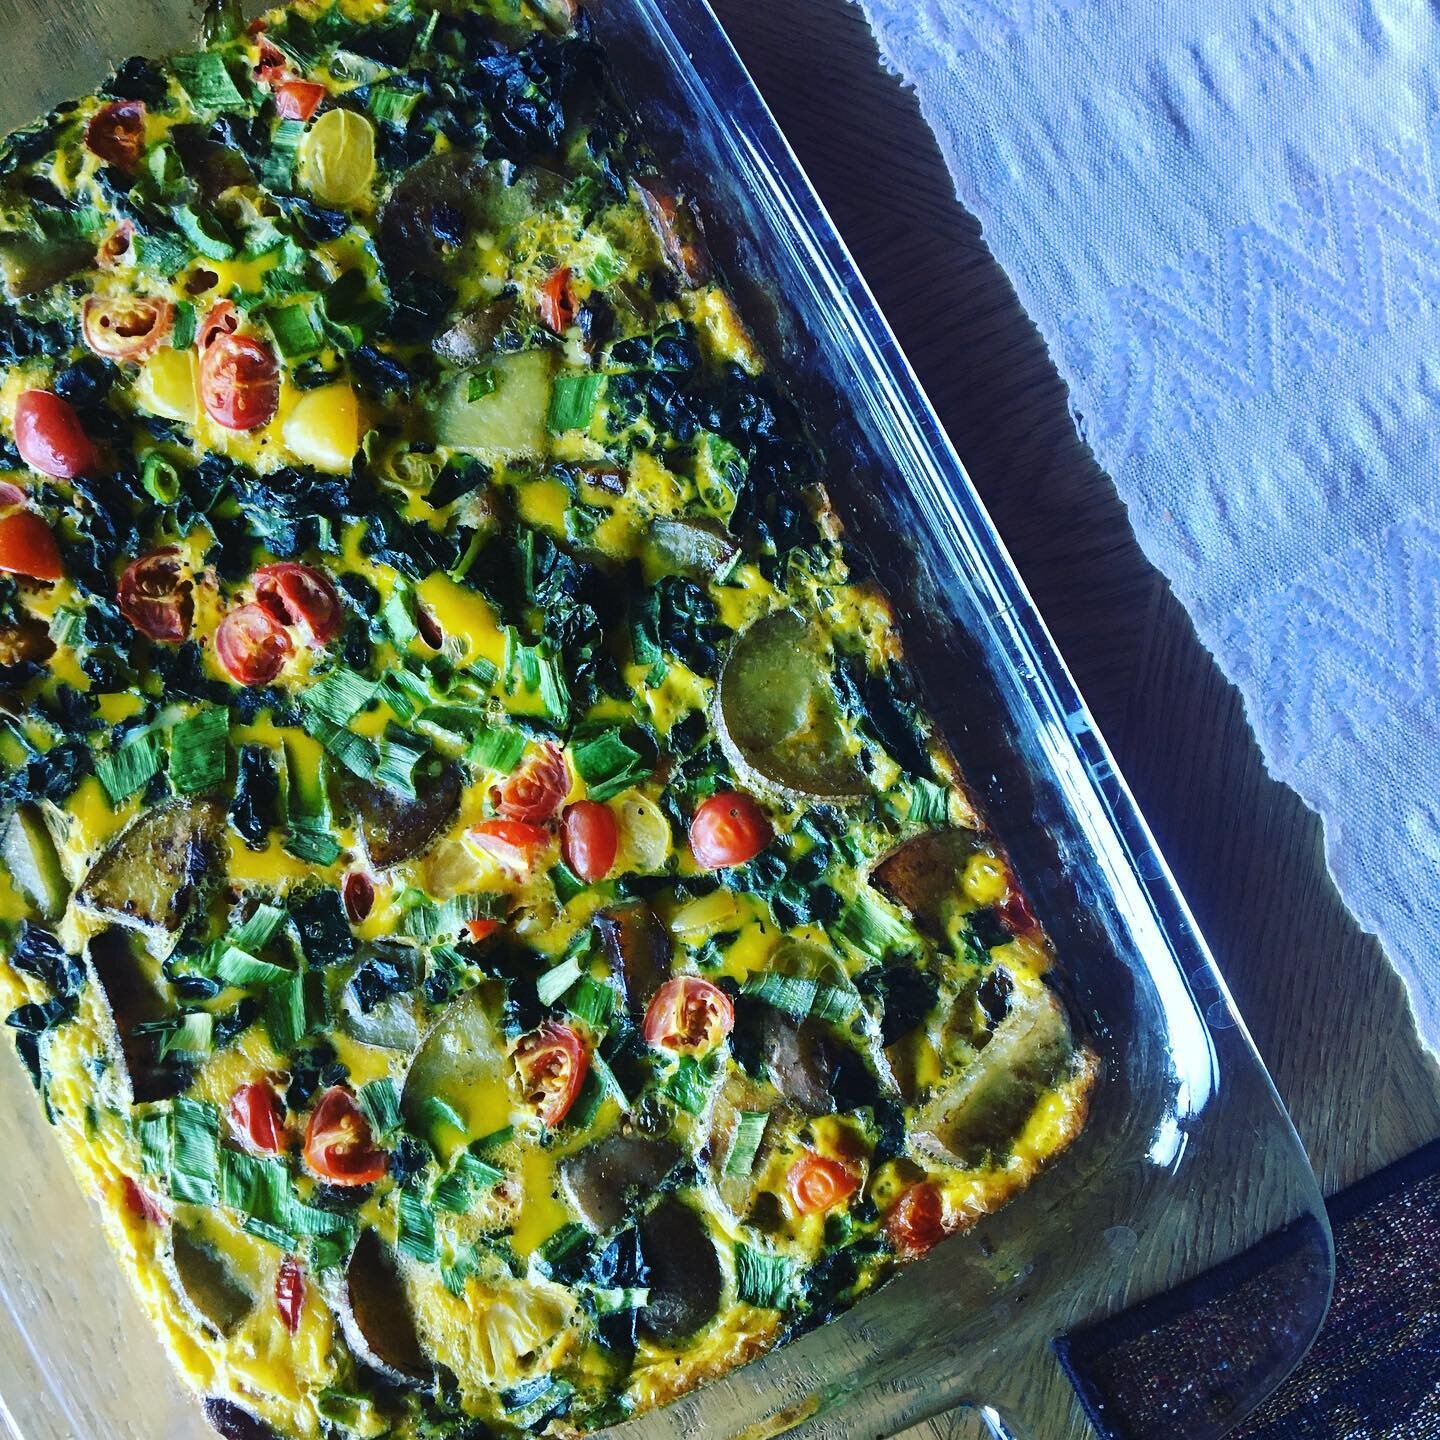 Check out that loaded frittata&mdash; yukons, cherry toms, kale, roasted garlic&mdash;-such a versatile dish, nutrient dense and great for any meal.
🥚🥚🥚🥚🥚
#nutritiousanddelicious #eggcelent #nutrientdense #spring #seedtohealth #pnwonderland #eat